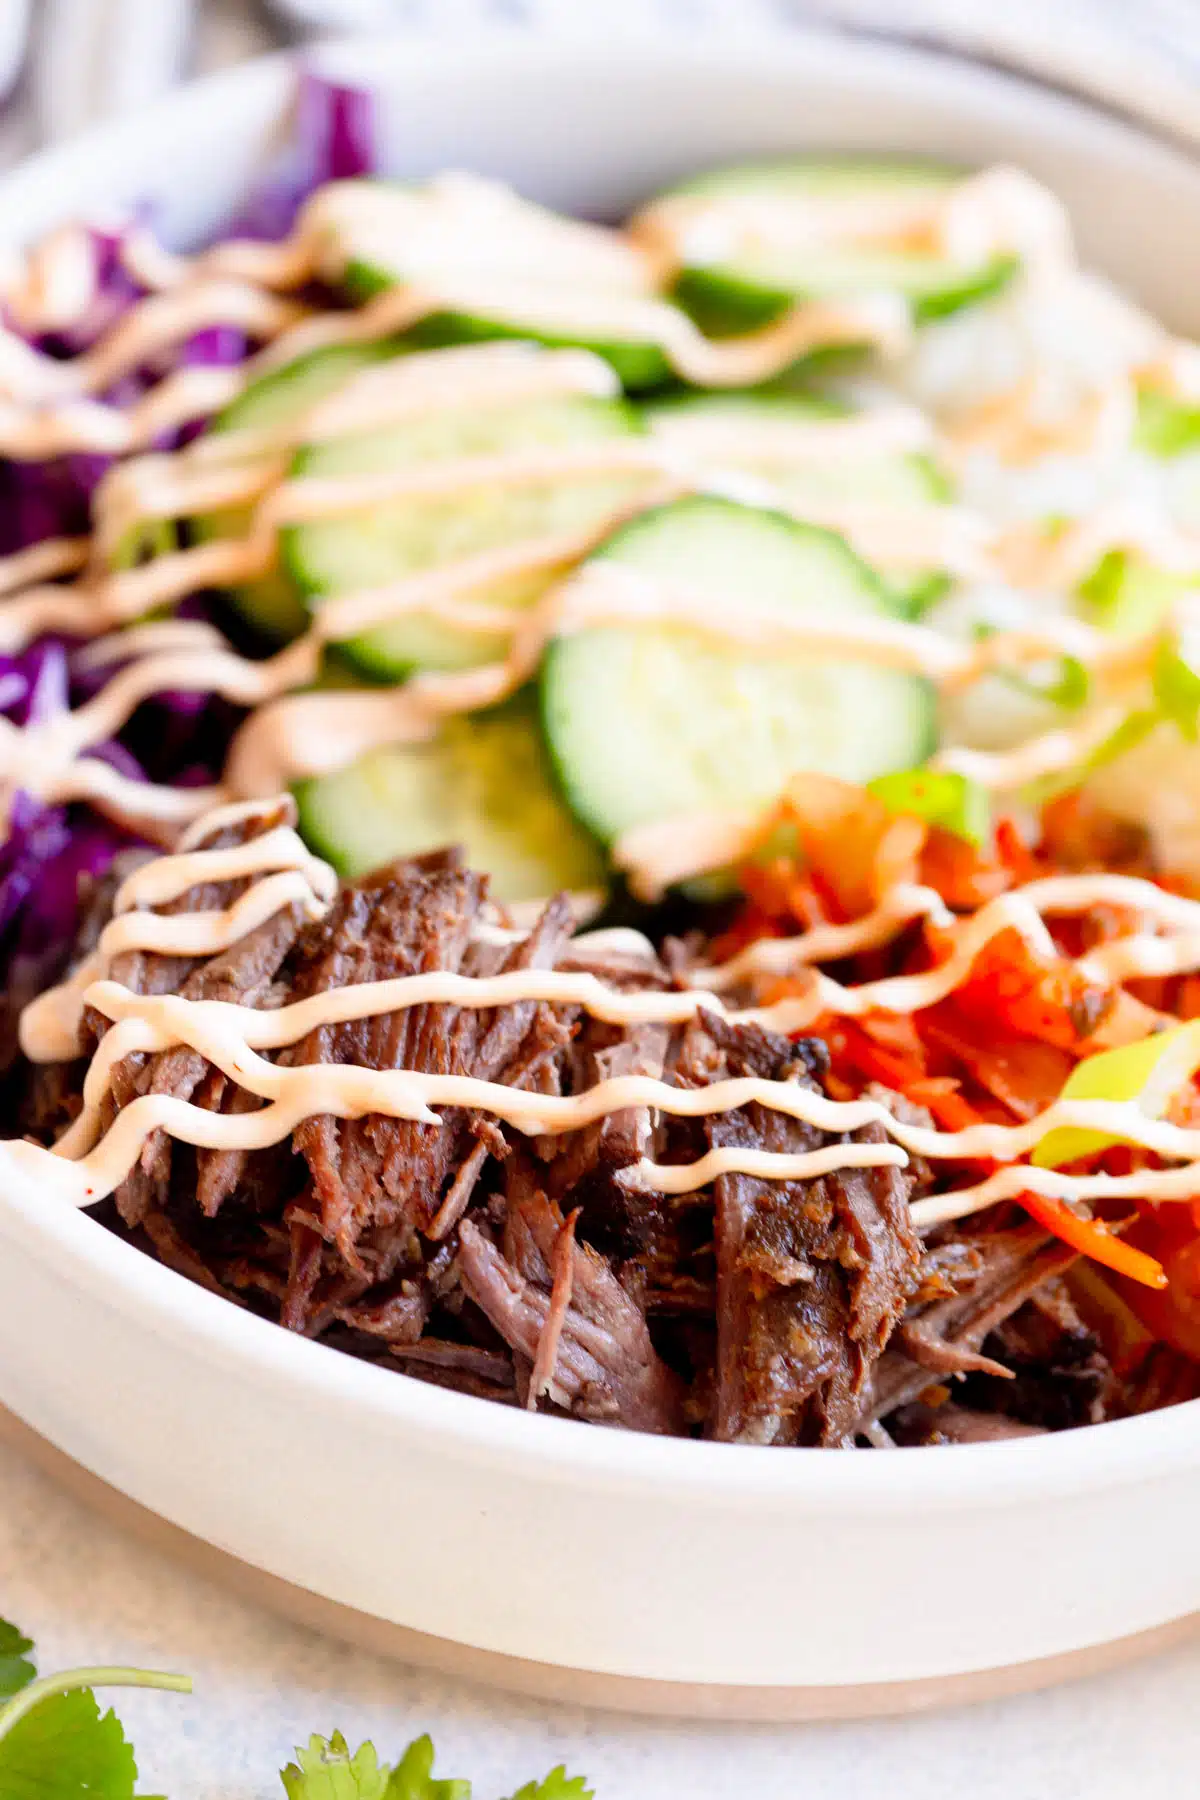 Slow Cooker Korean Beef Burrito Bowls in a shallow white bowl with some cabbage and cilantro on the gray background.